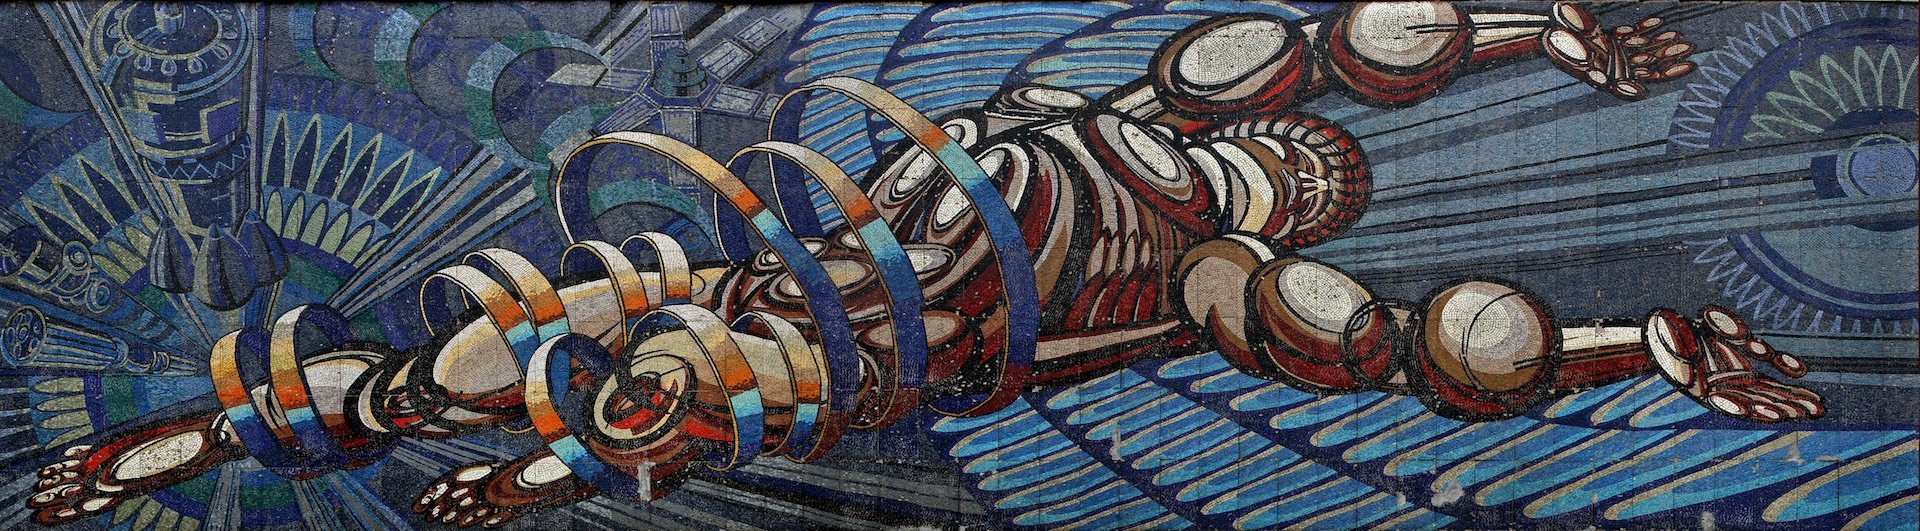 Mosaic by an unknown artist on the Kök-Töbe Television Tower